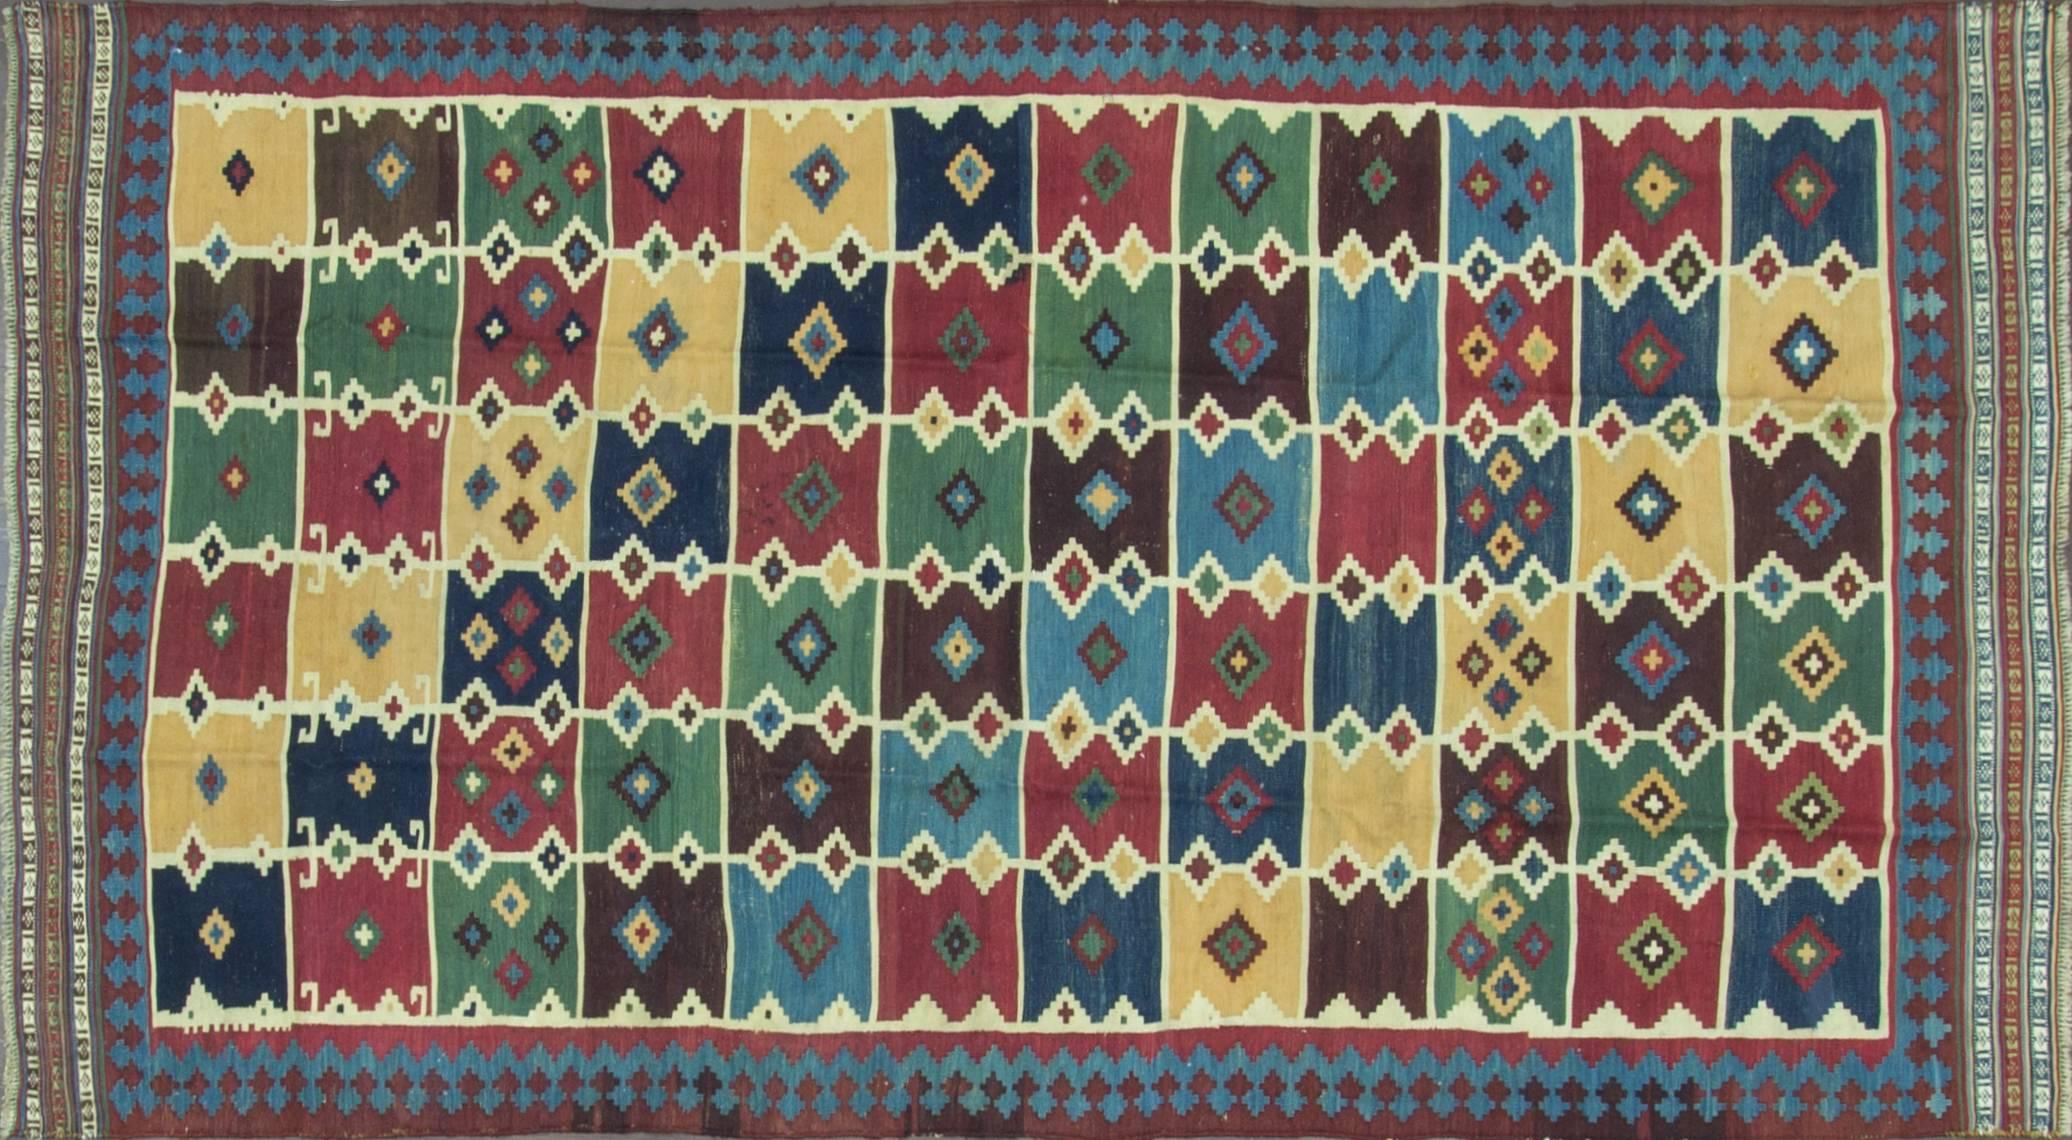 The polychrome field with horizontal bands of mustard, midnight blue, powder blue, green, and ivory rectangular motifs. In the 16th century the predecessors of the Qashqai were in what is now the Azerbaijan area, they were a group of Oguz/Seljuq